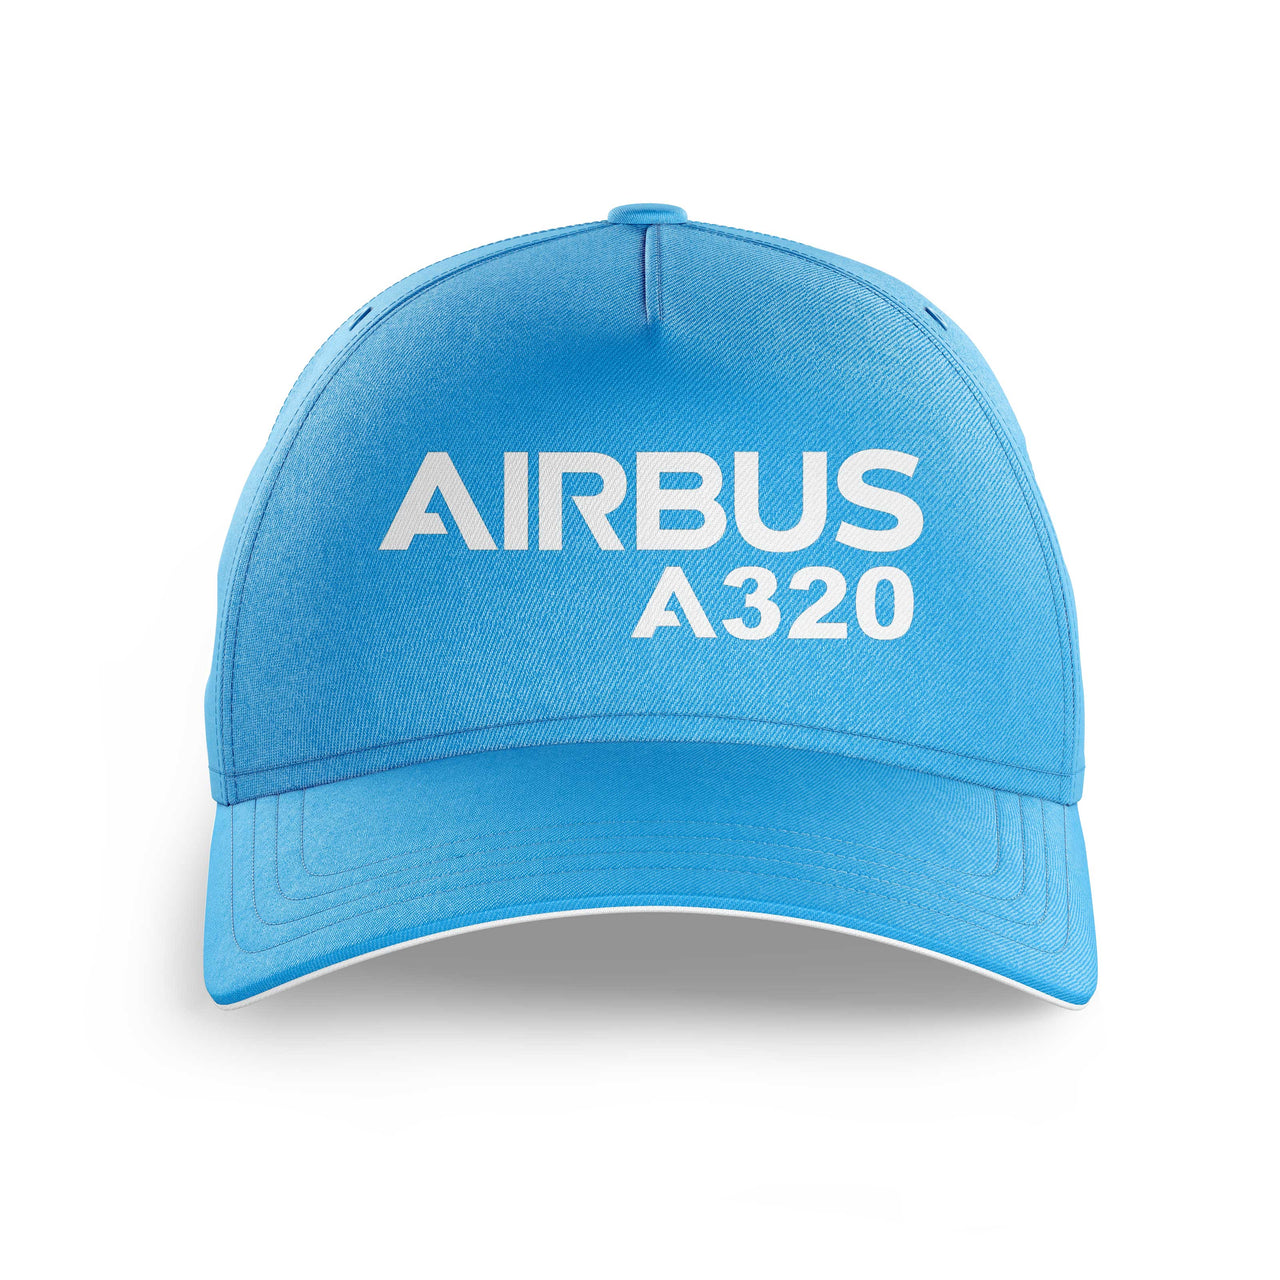 Airbus A320 & Text Printed Hats